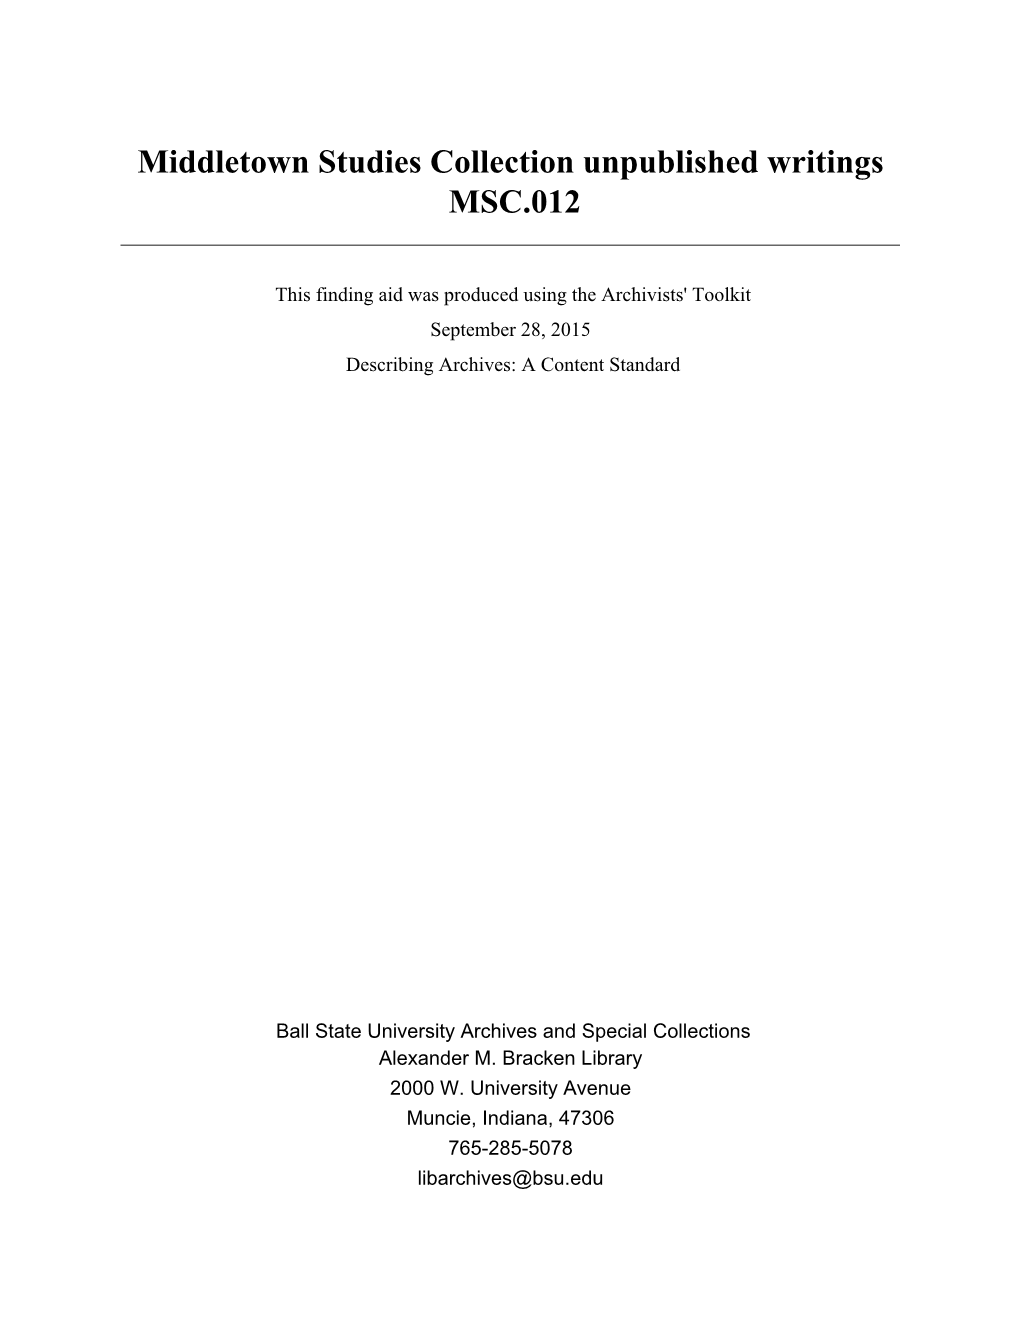 Middletown Studies Collection Unpublished Writings MSC.012